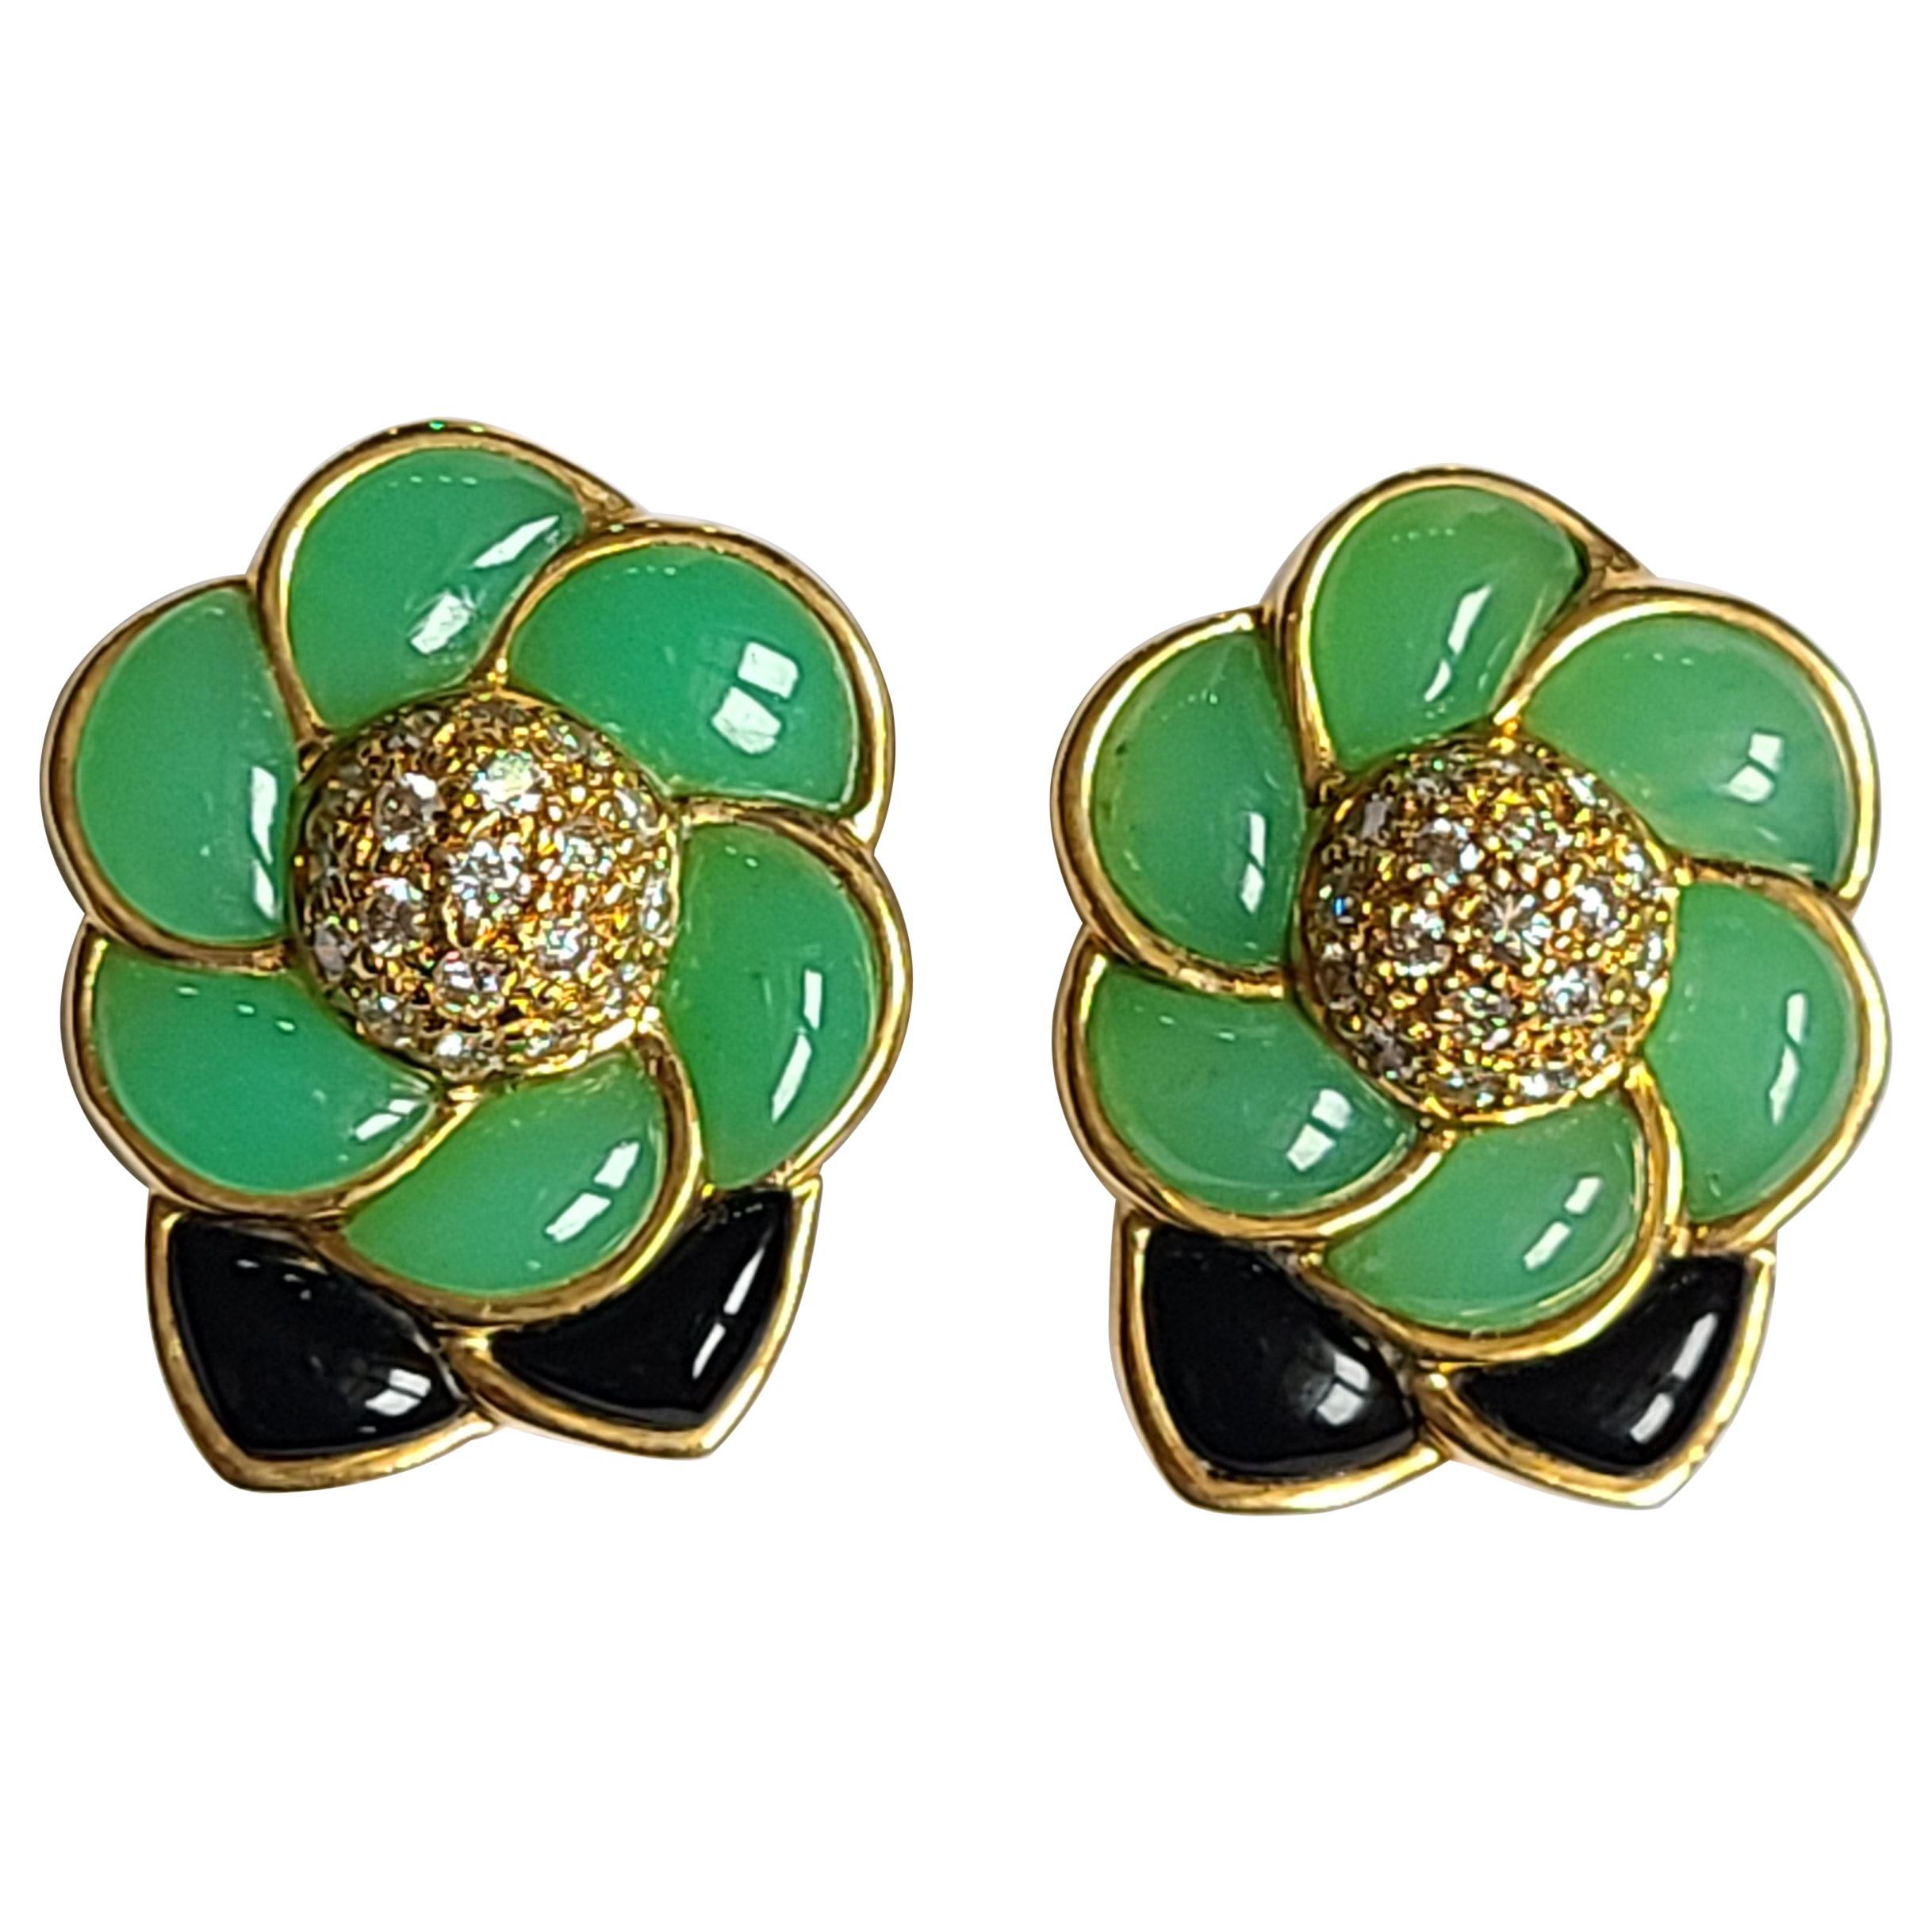 Green and Black Onyx Studs/Earrings with Diamonds in 18 Karat Gold